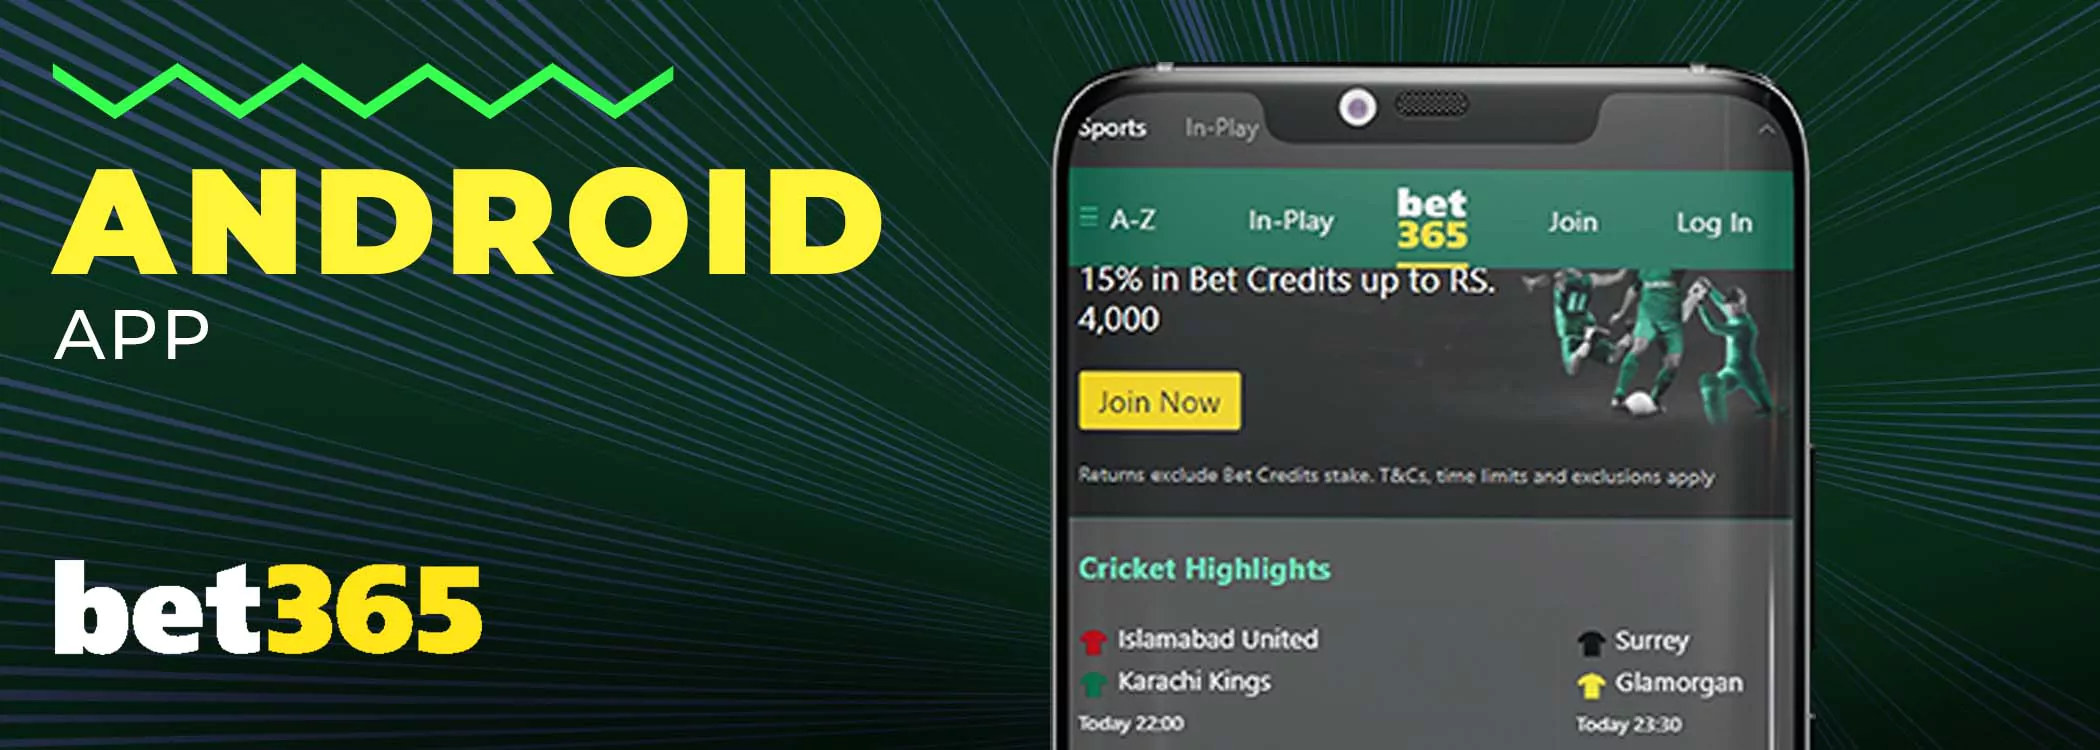 Bet365 android app.